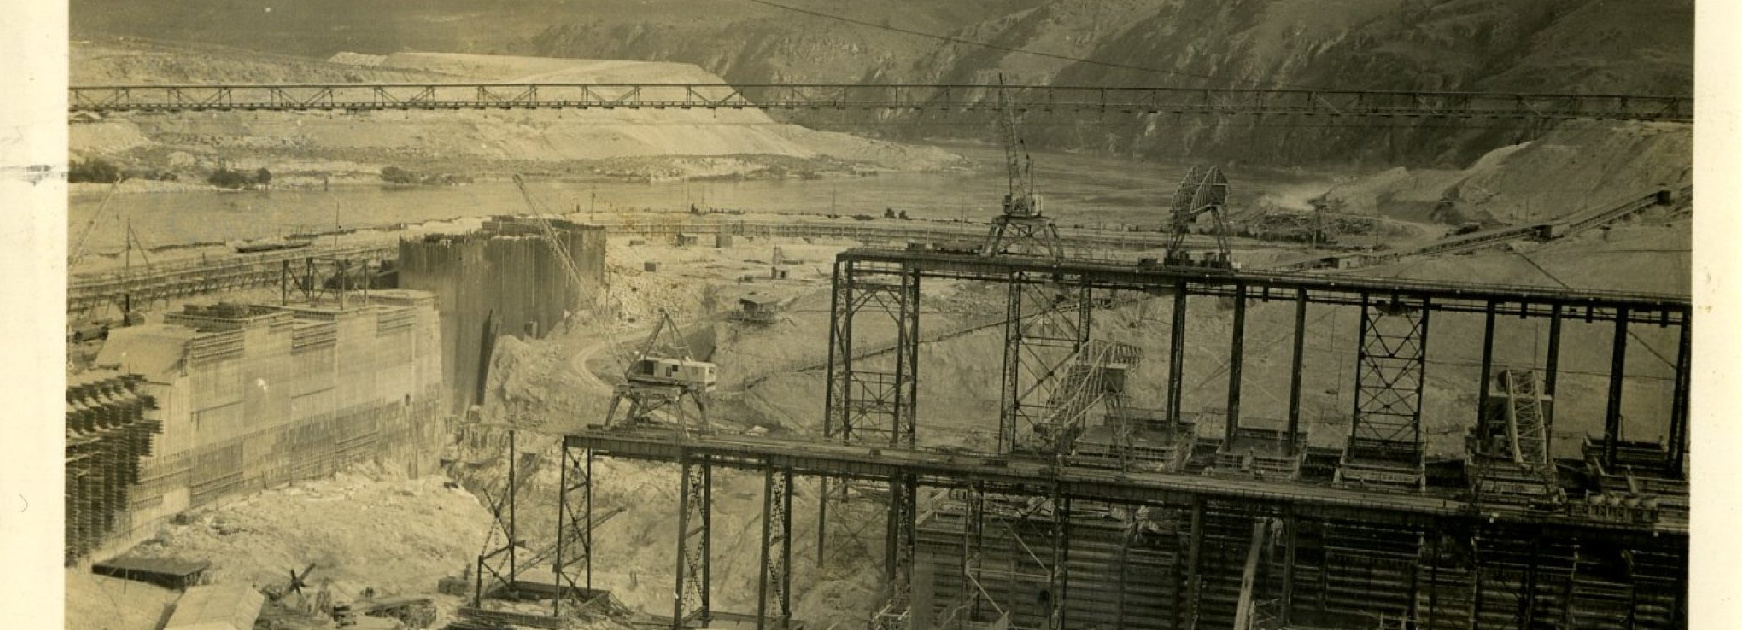 Landscape view of the Grand Coulee Dam construction in Washington, 1936